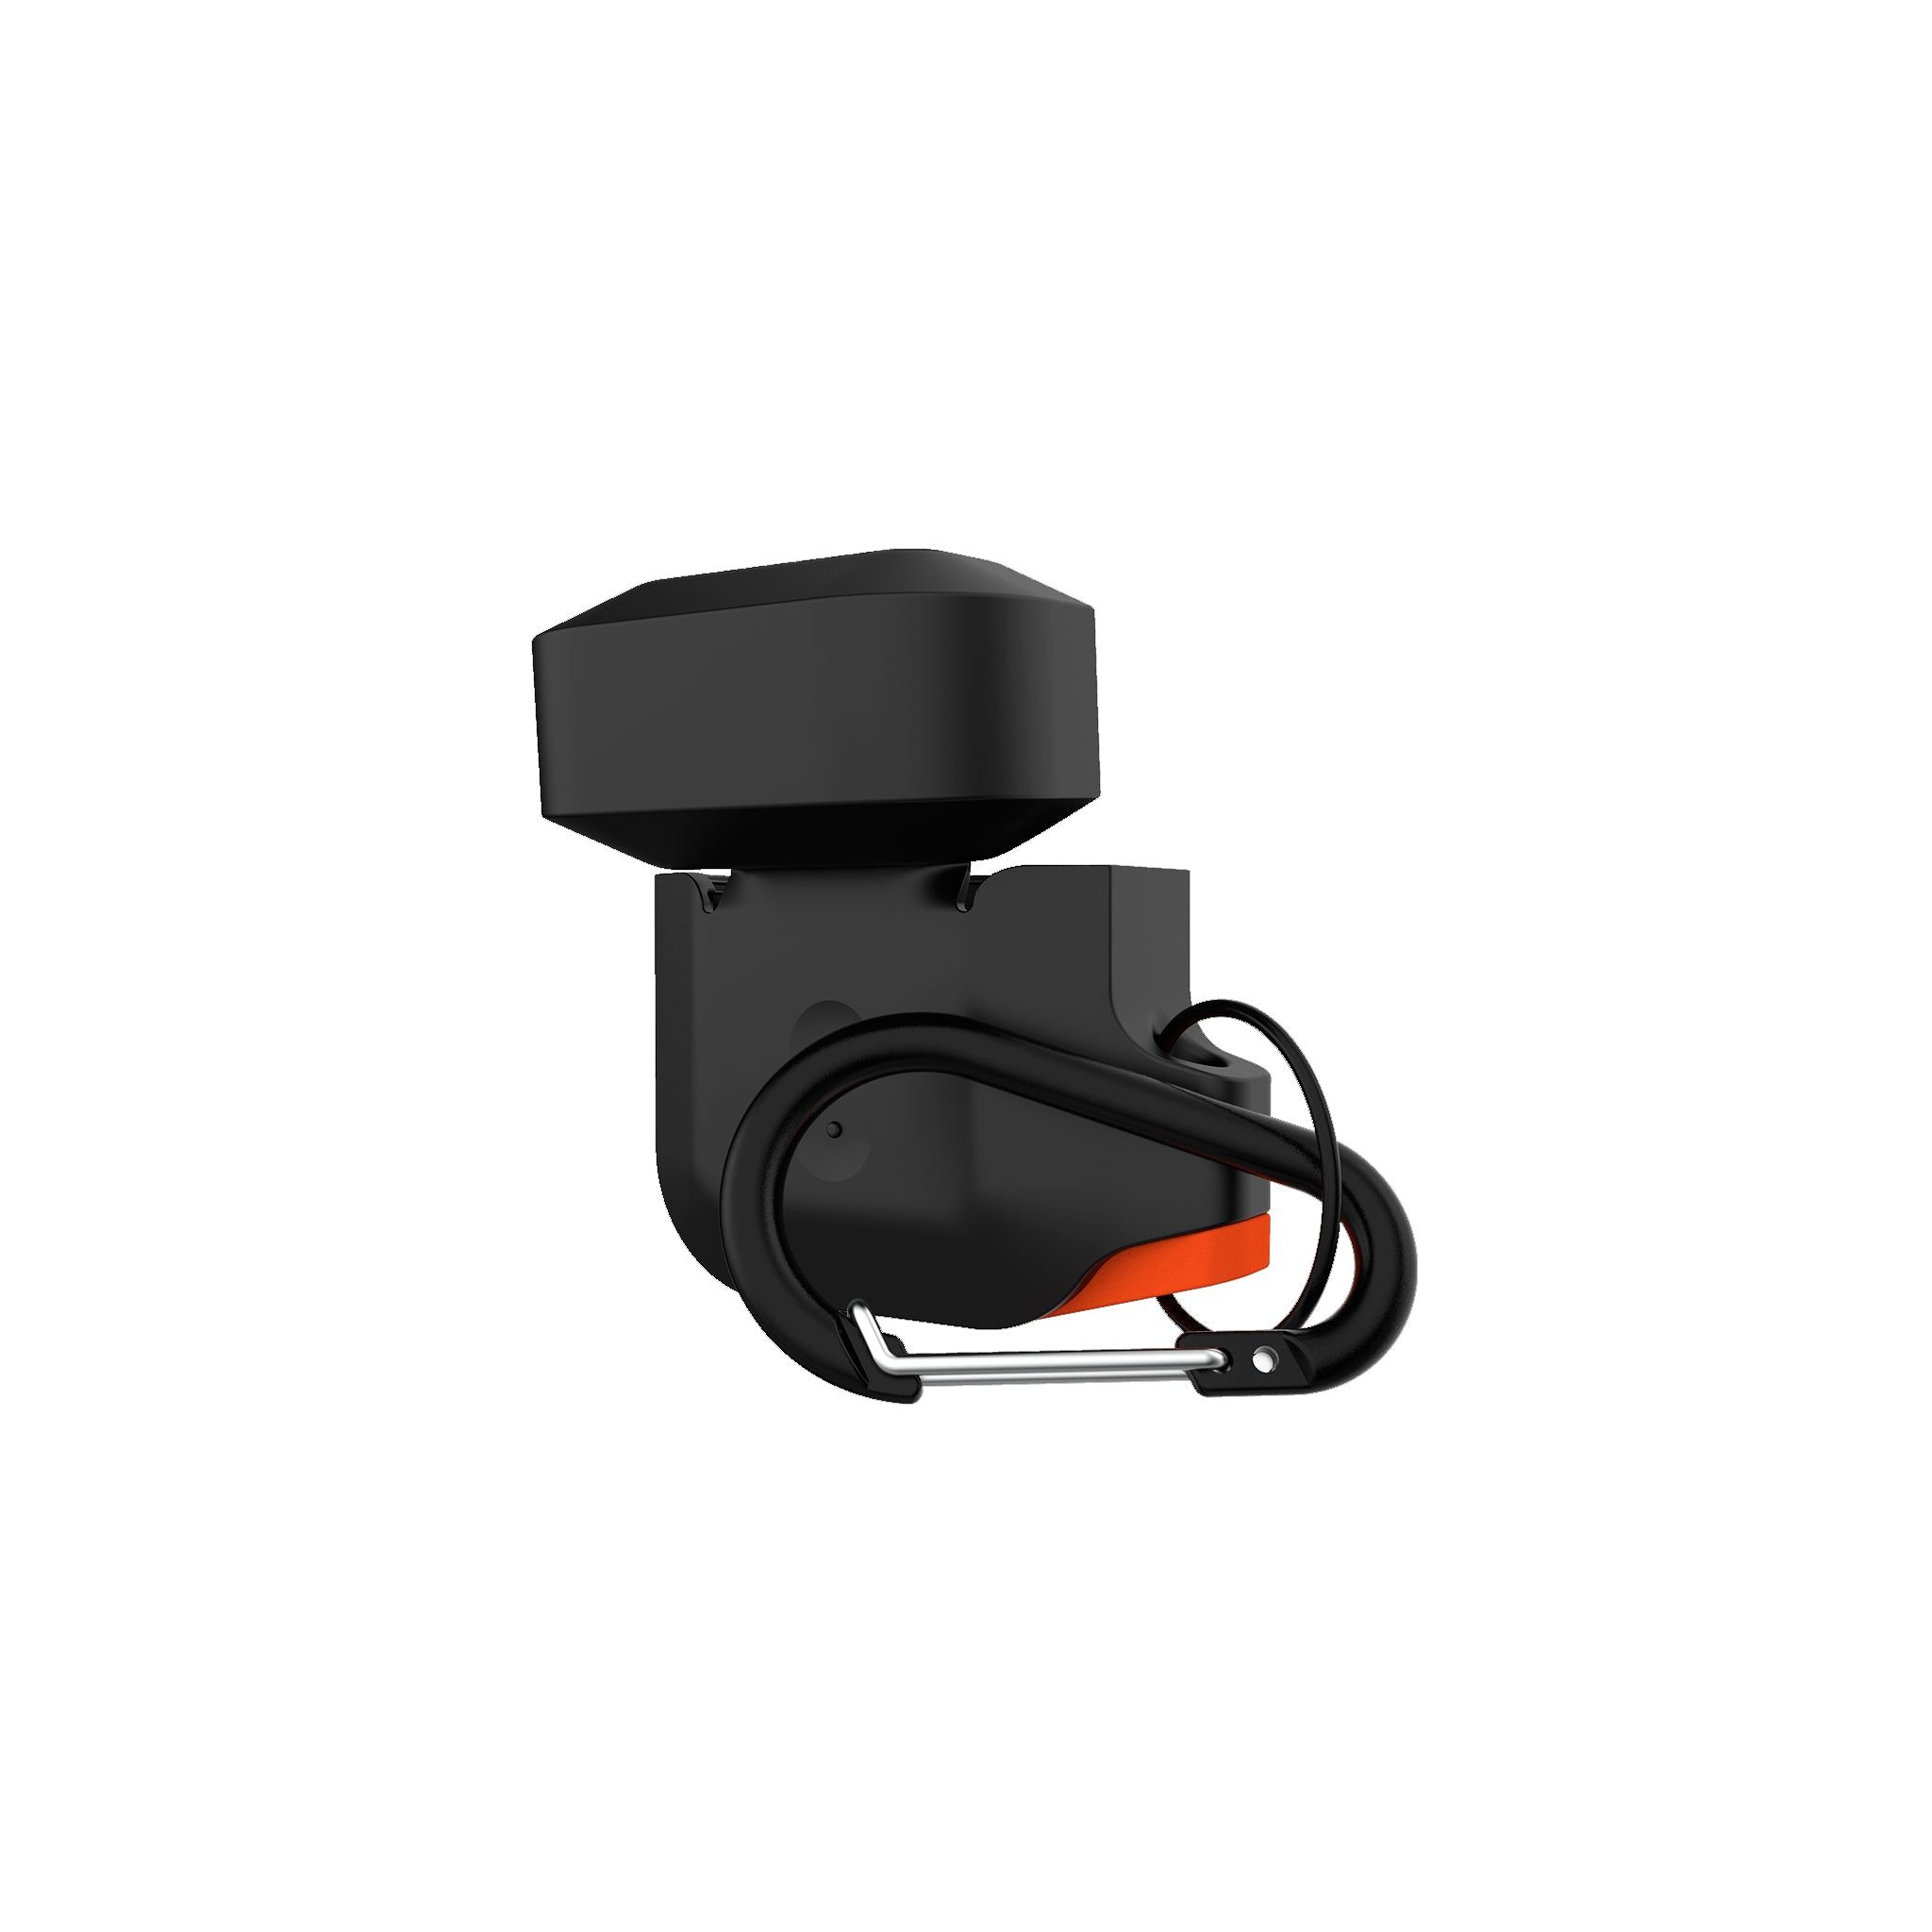 Urban Armor Gear (UAG) - Silicone Case for Apple AirPods - Black and Orange